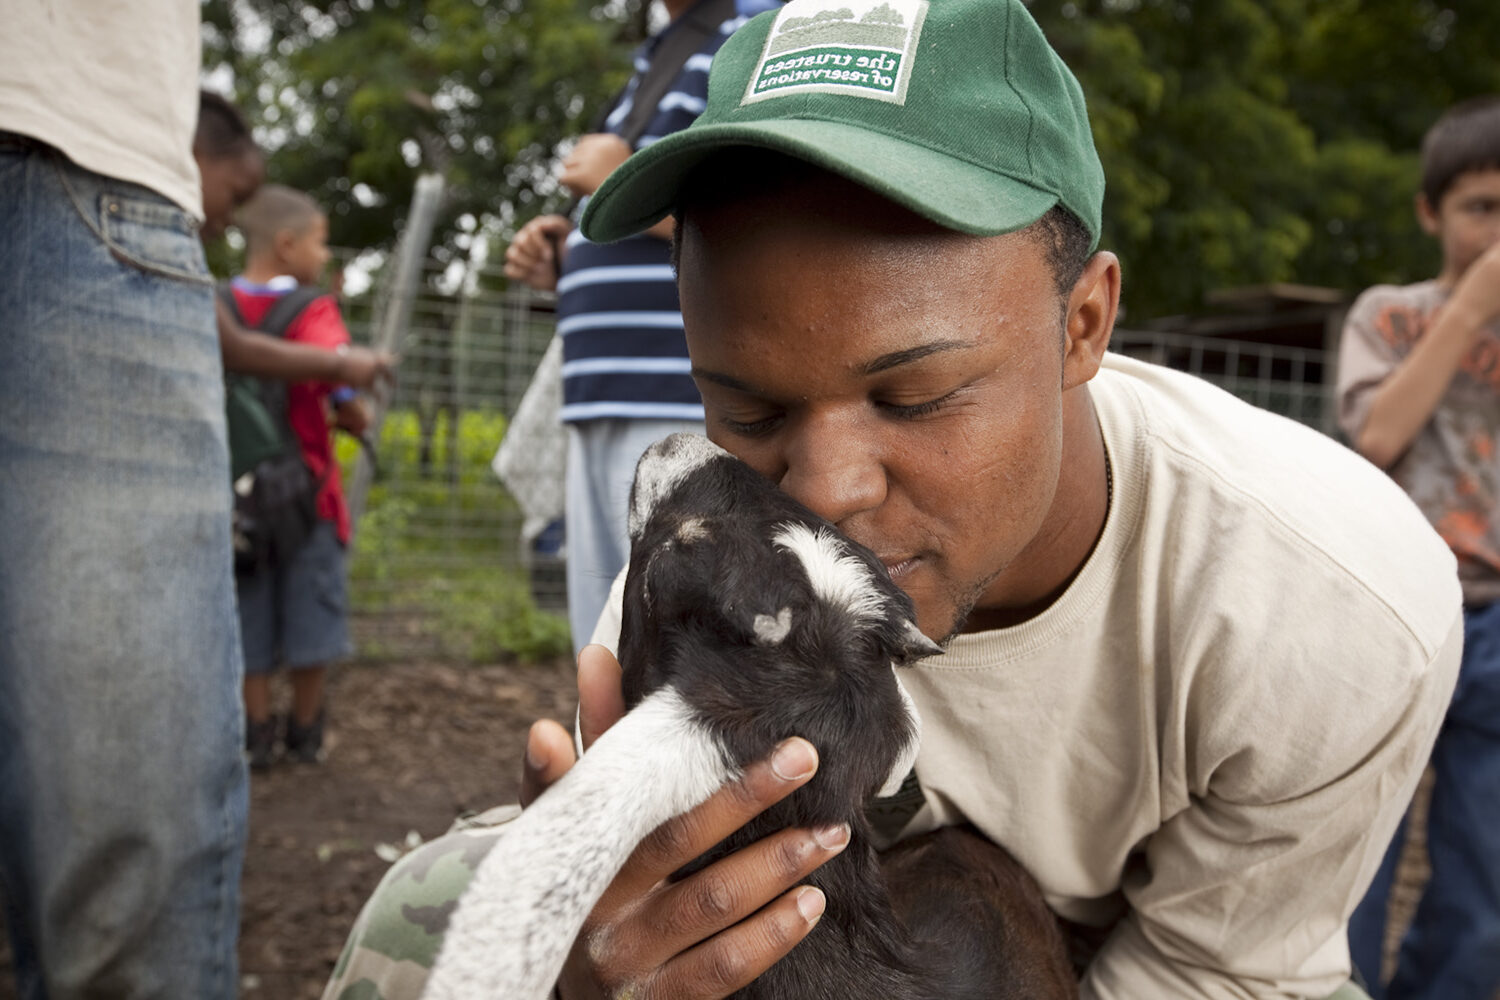 A man holding a baby goat close to his face at a Trustees property